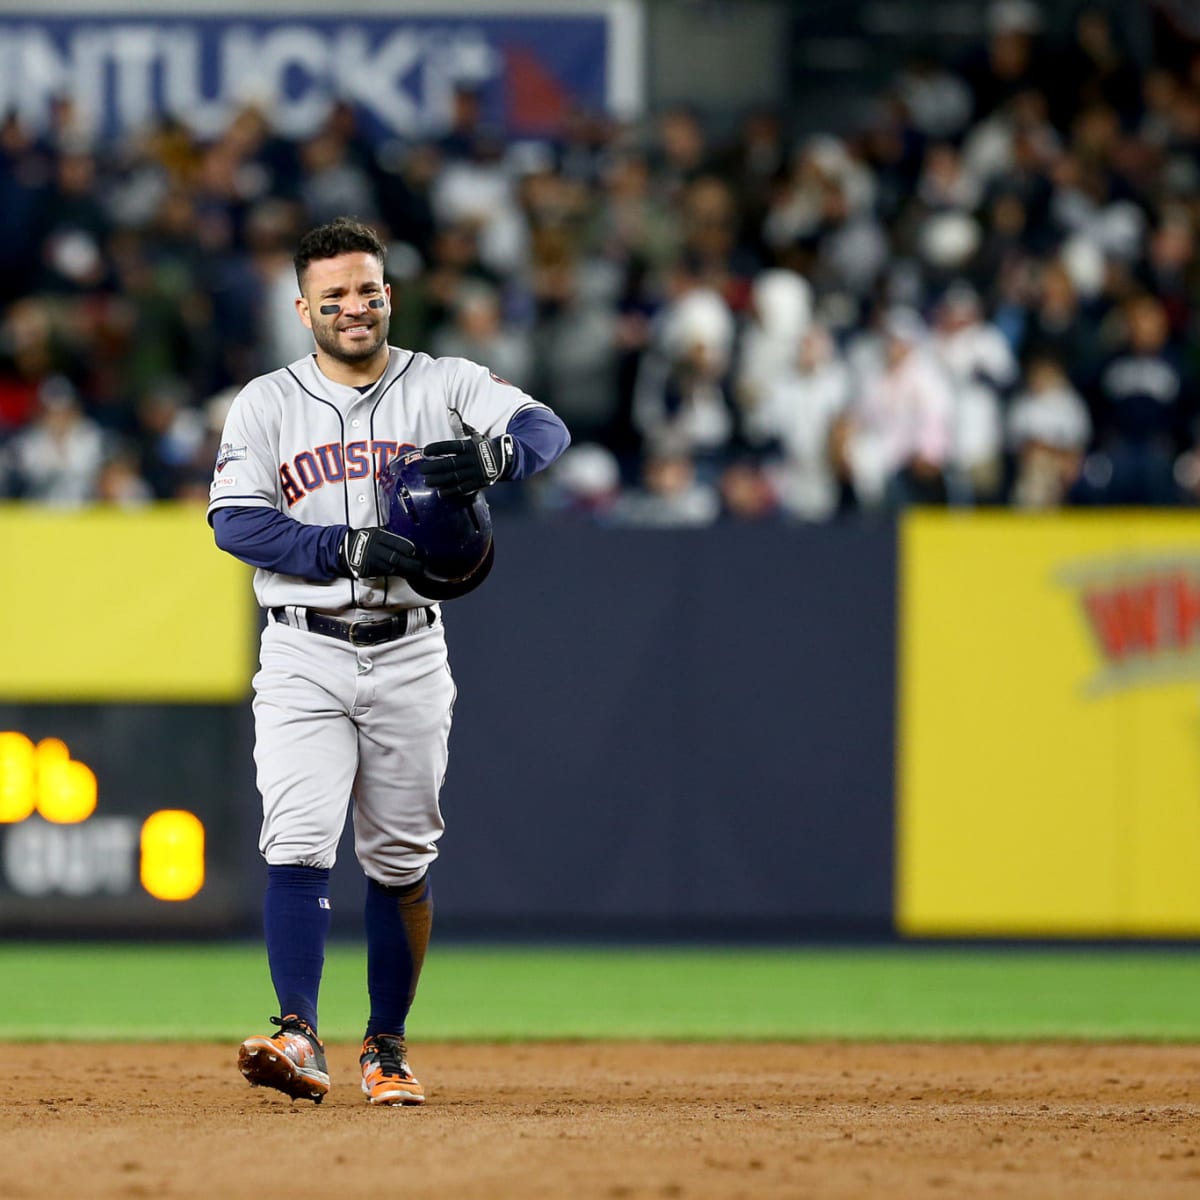 Jose Altuve's shirtless homer celebration: This is what people are saying  about his clutch moment against the Yankees